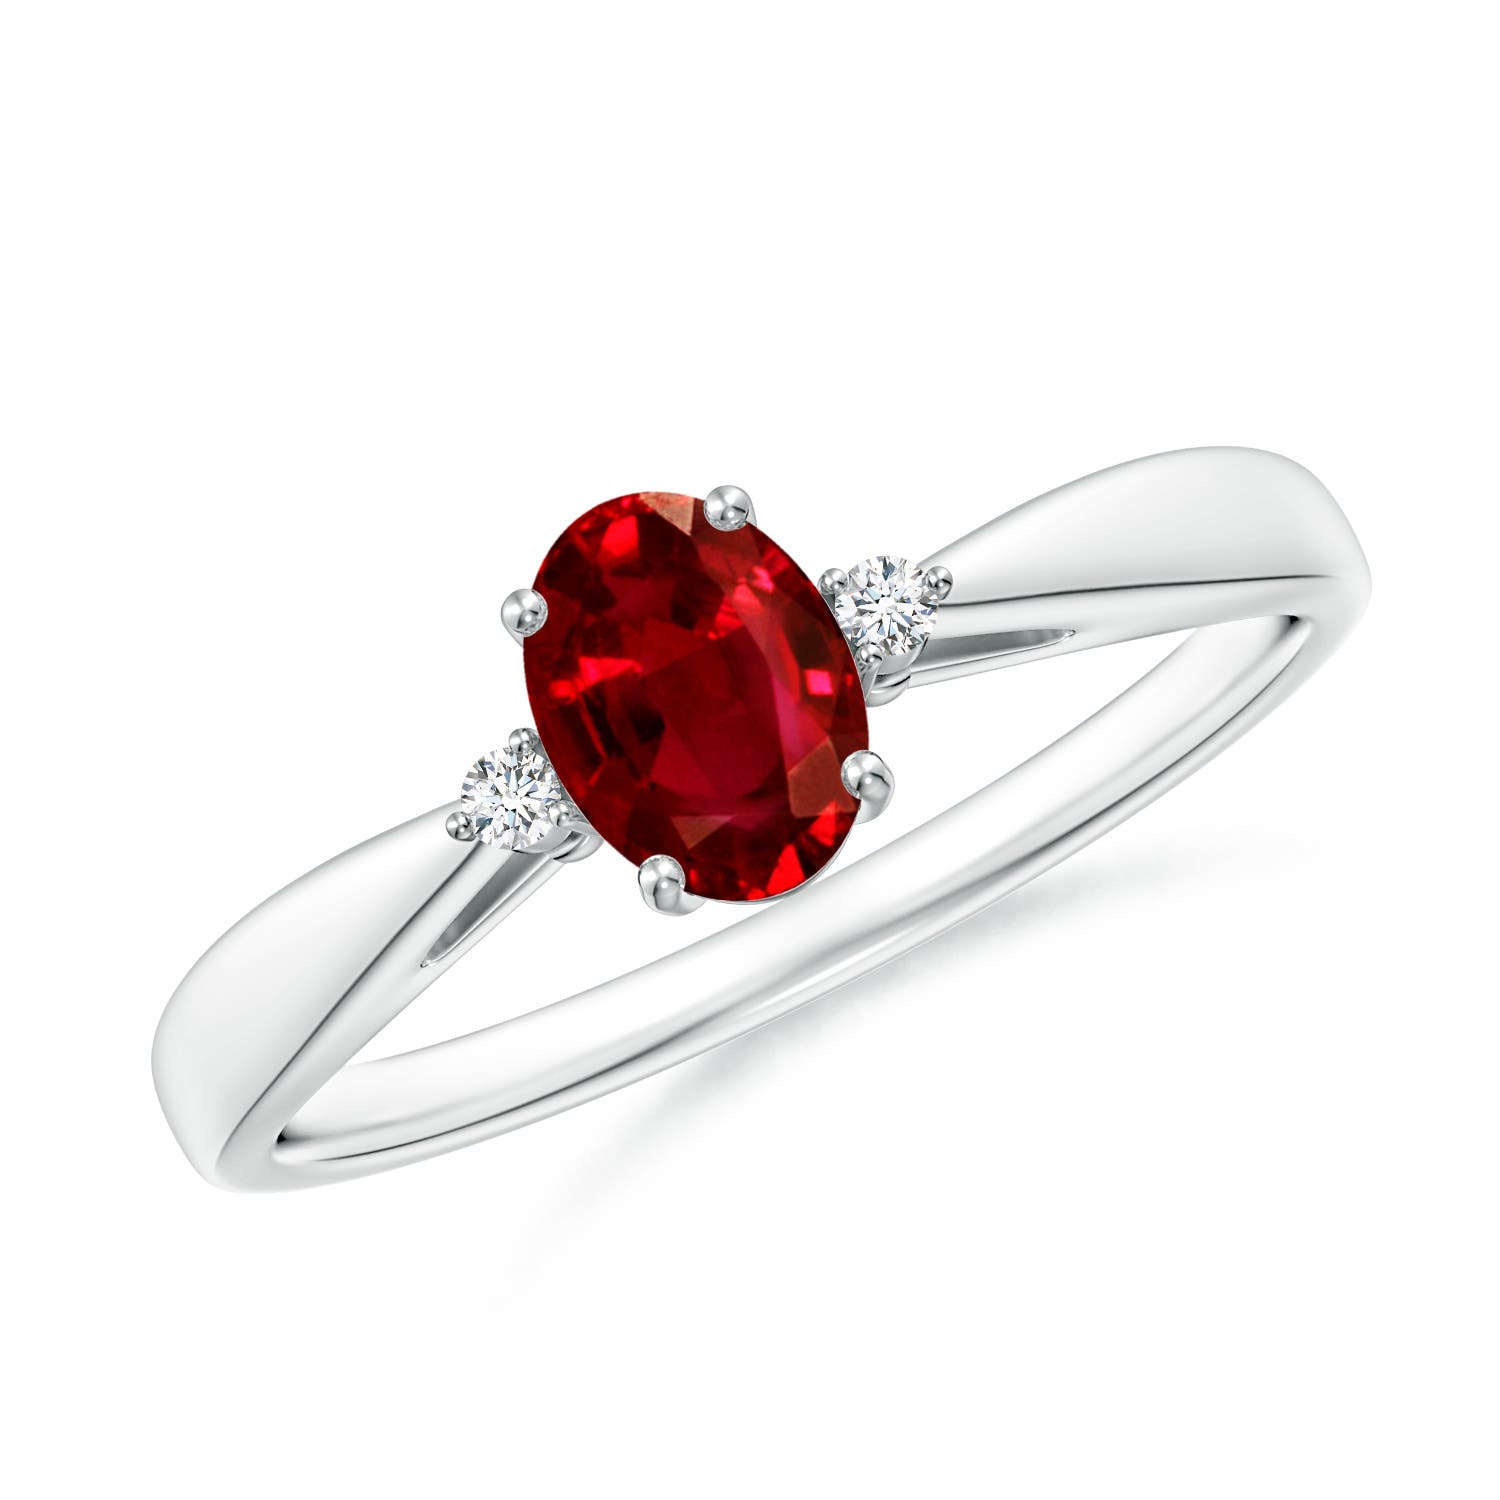 AAAA- Ruby / 0.63 CT / 14 KT White Gold